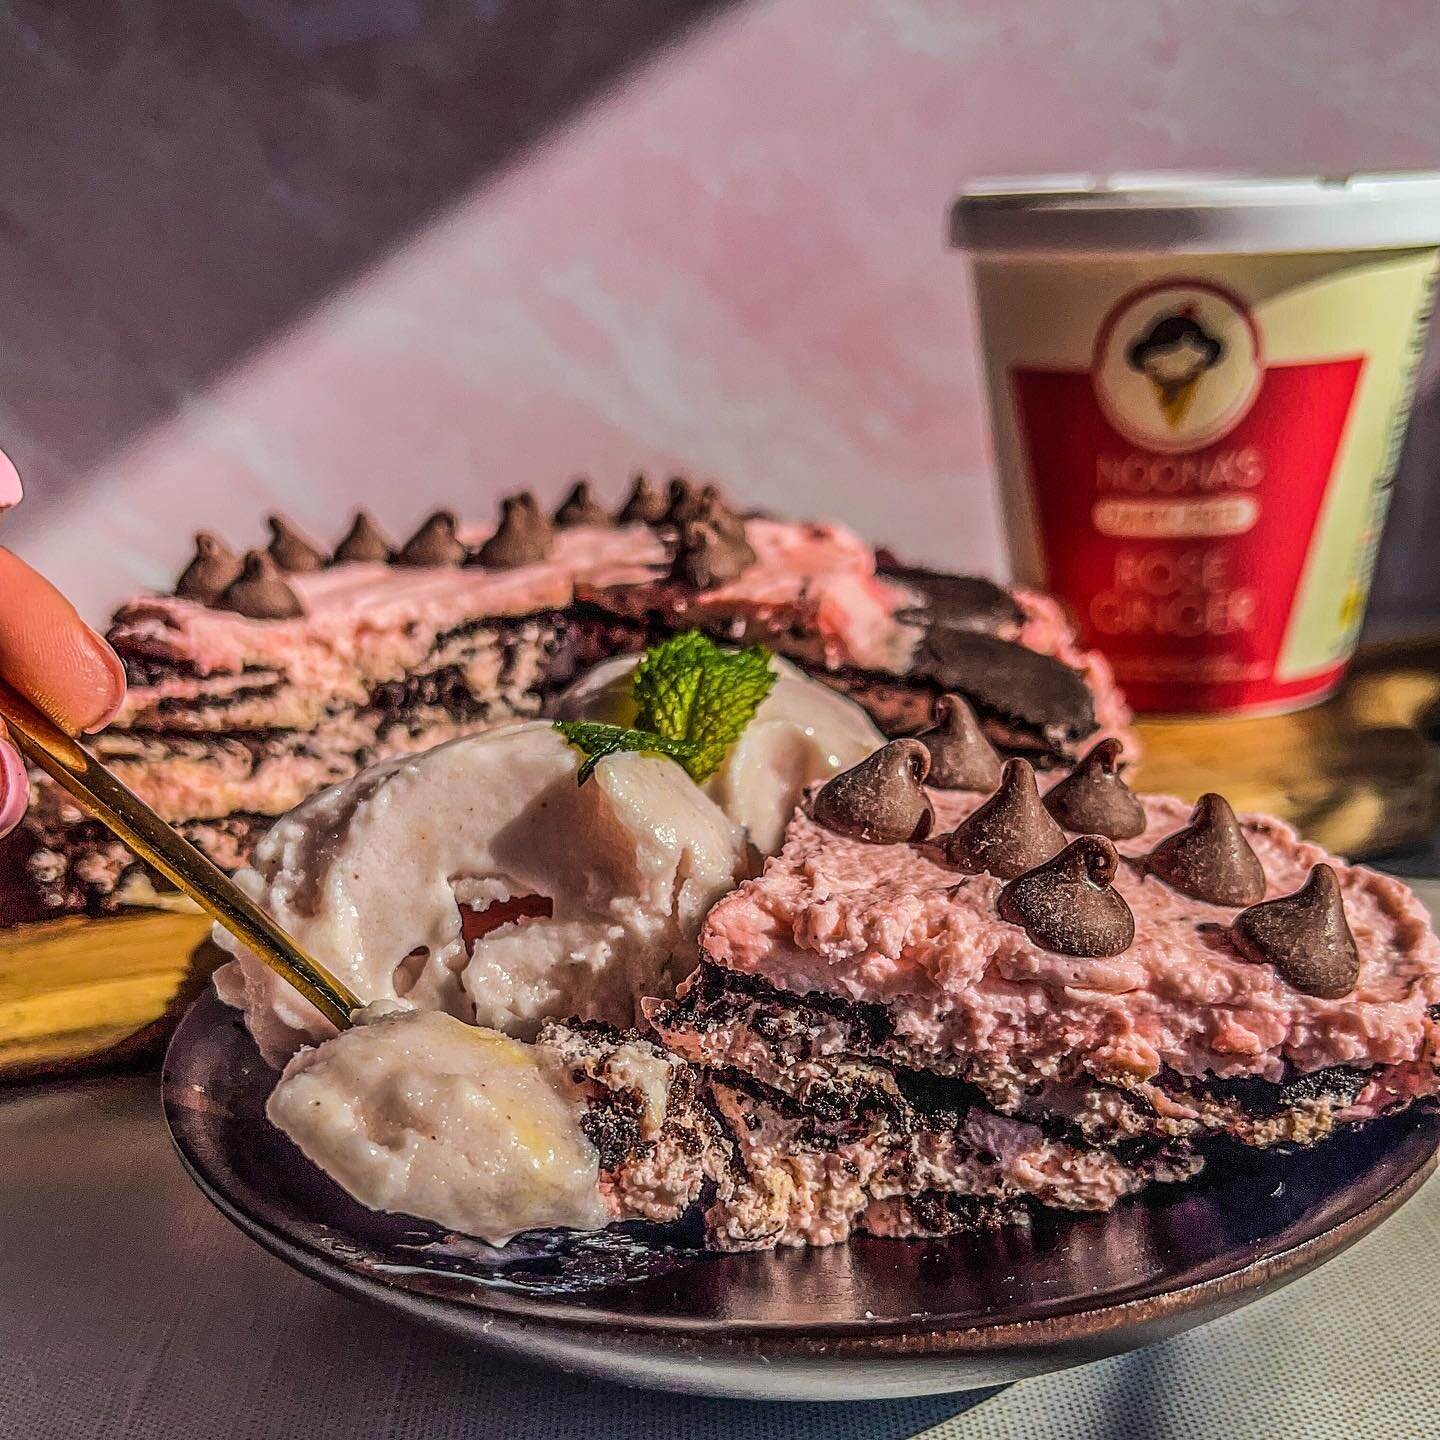 The easiest Valentine&rsquo;s Day icebox cake you never made&hellip;but you should 💕🍰. It&rsquo;s fluffy, creamy with layers of fresh vanilla whipped cream and cookies.

Served with Noona&rsquo;s Vegan Rose Ginger Ice Cream makes for a perfect roma